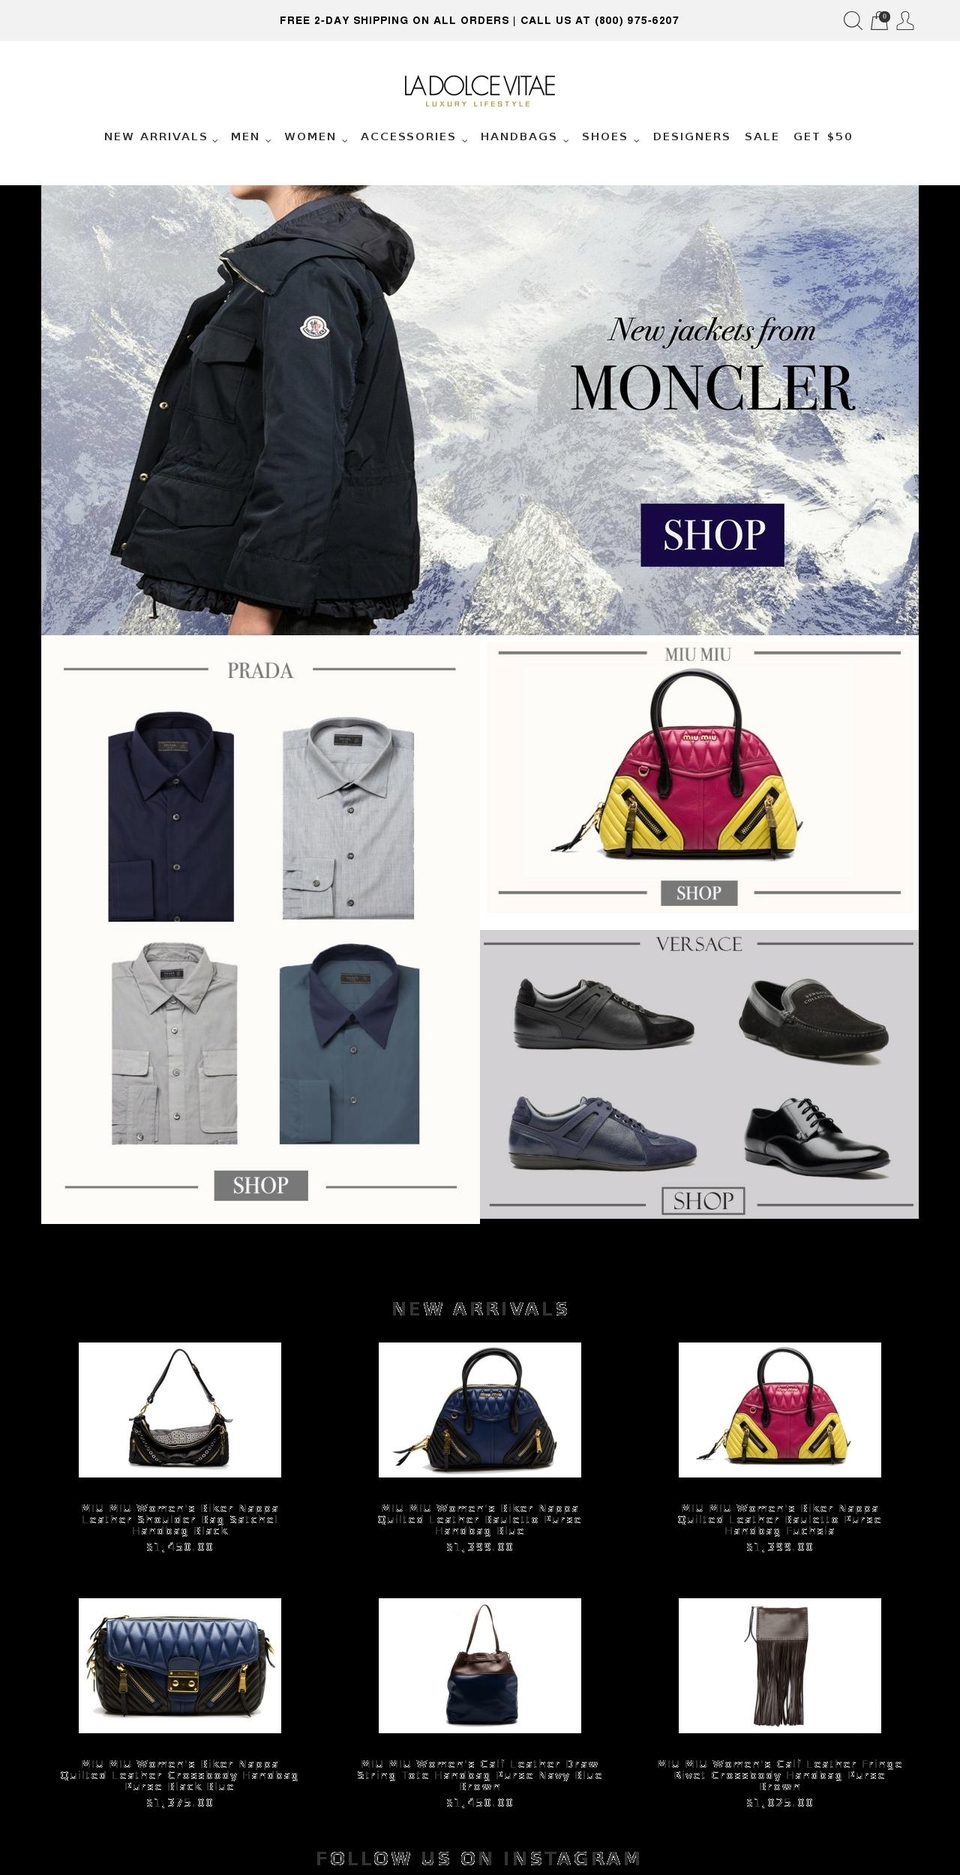 master Shopify theme site example ladolcevitae.com